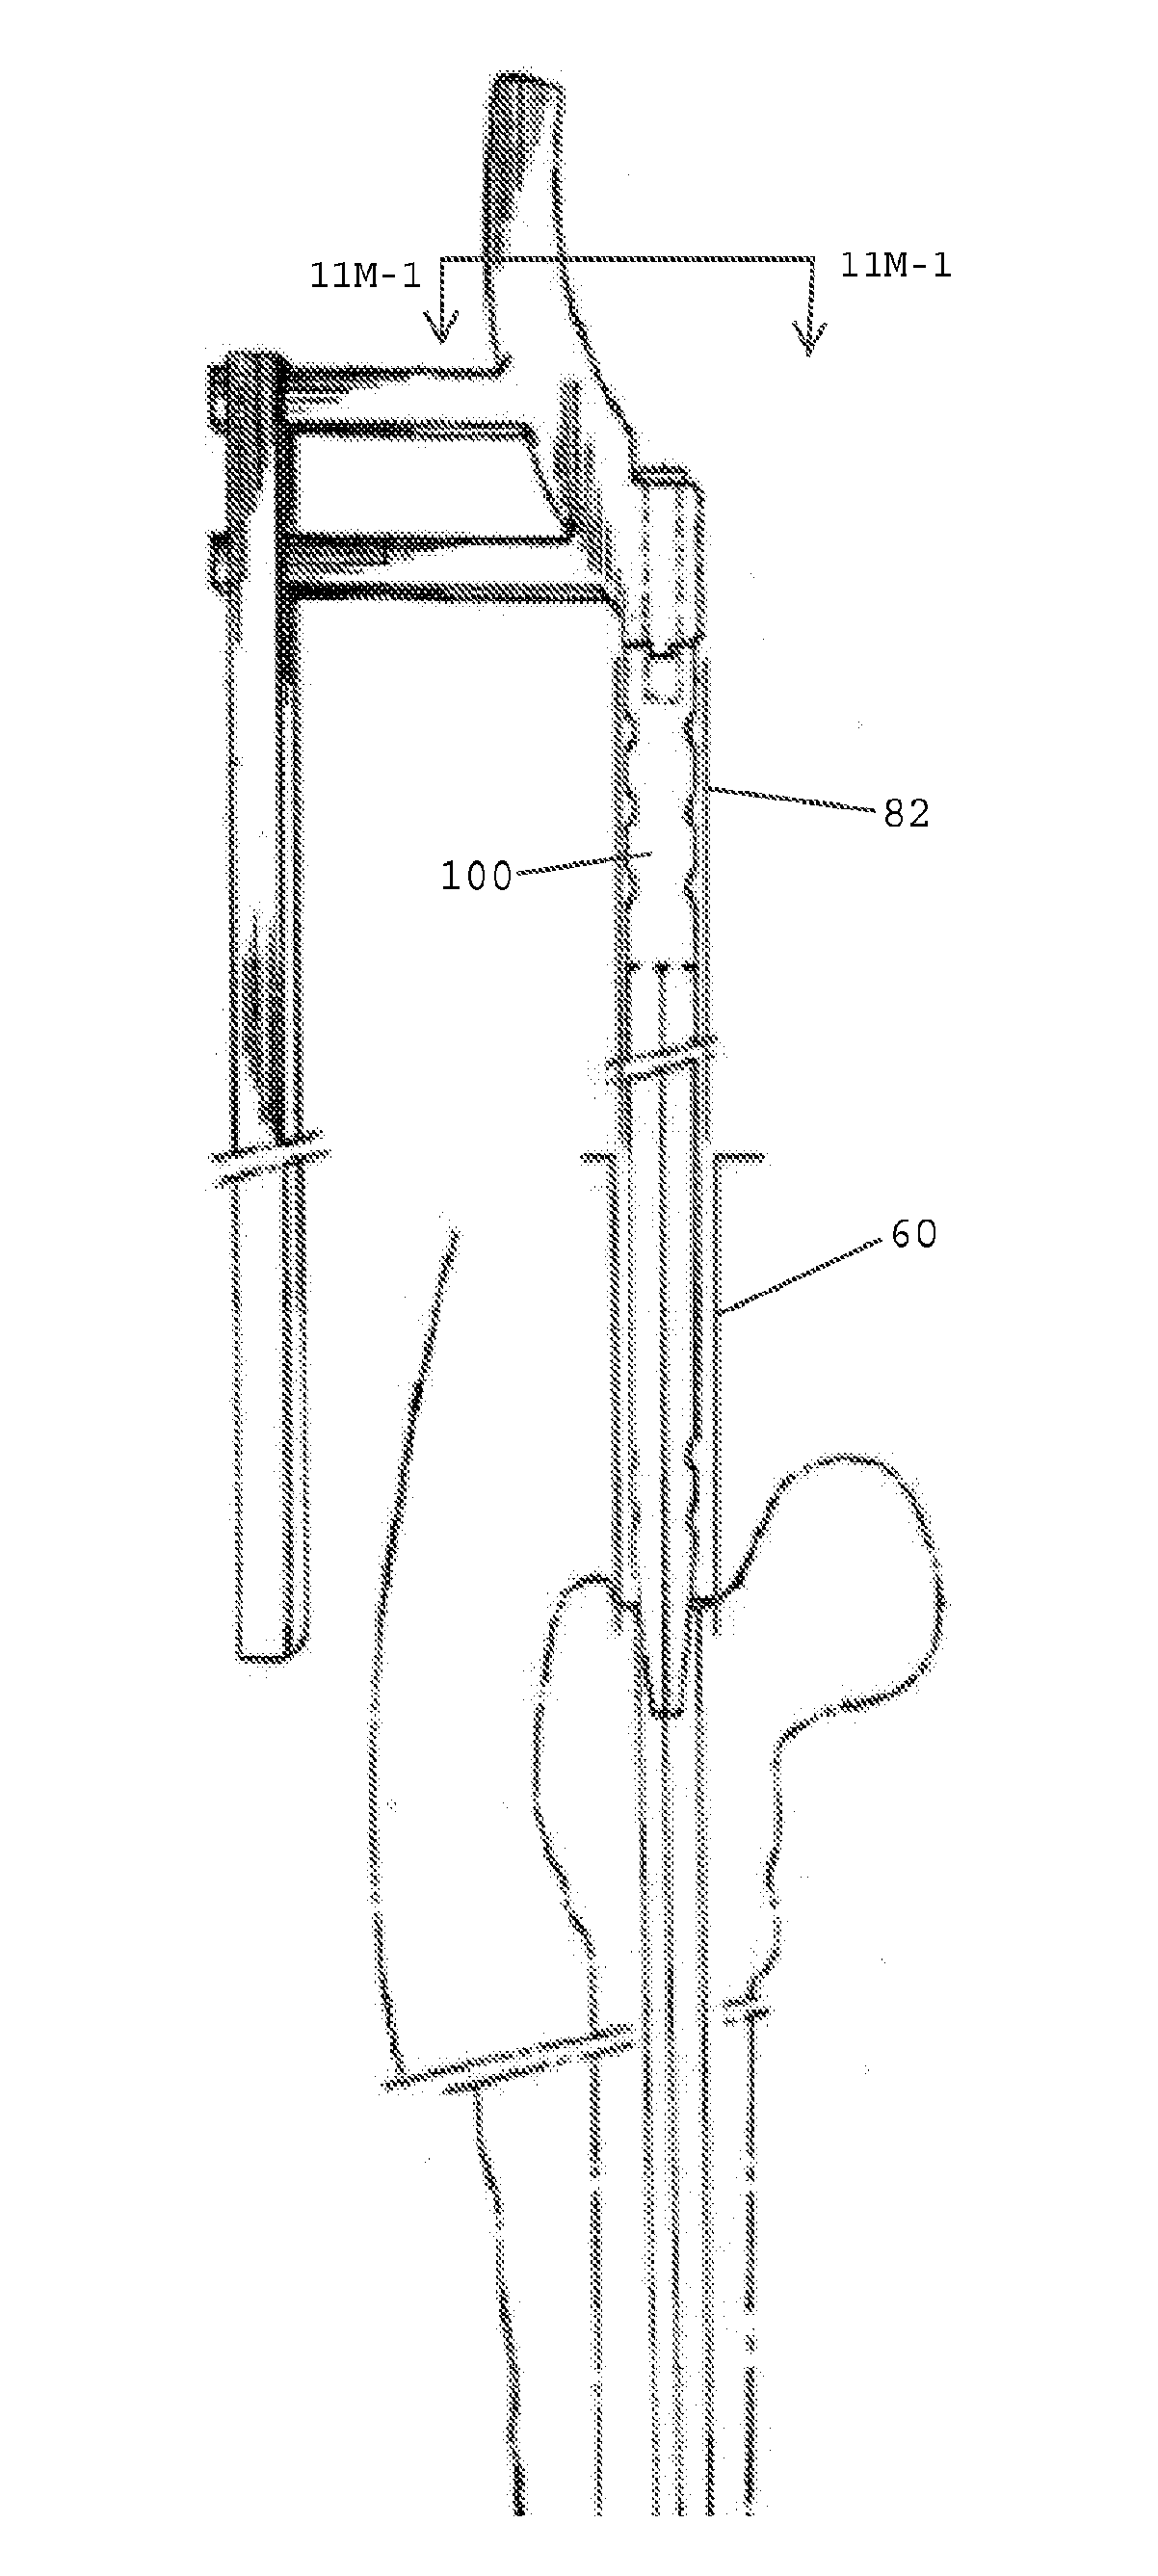 Minimally invasive endoscopic systems for placing intramedullary nails and methods therefor